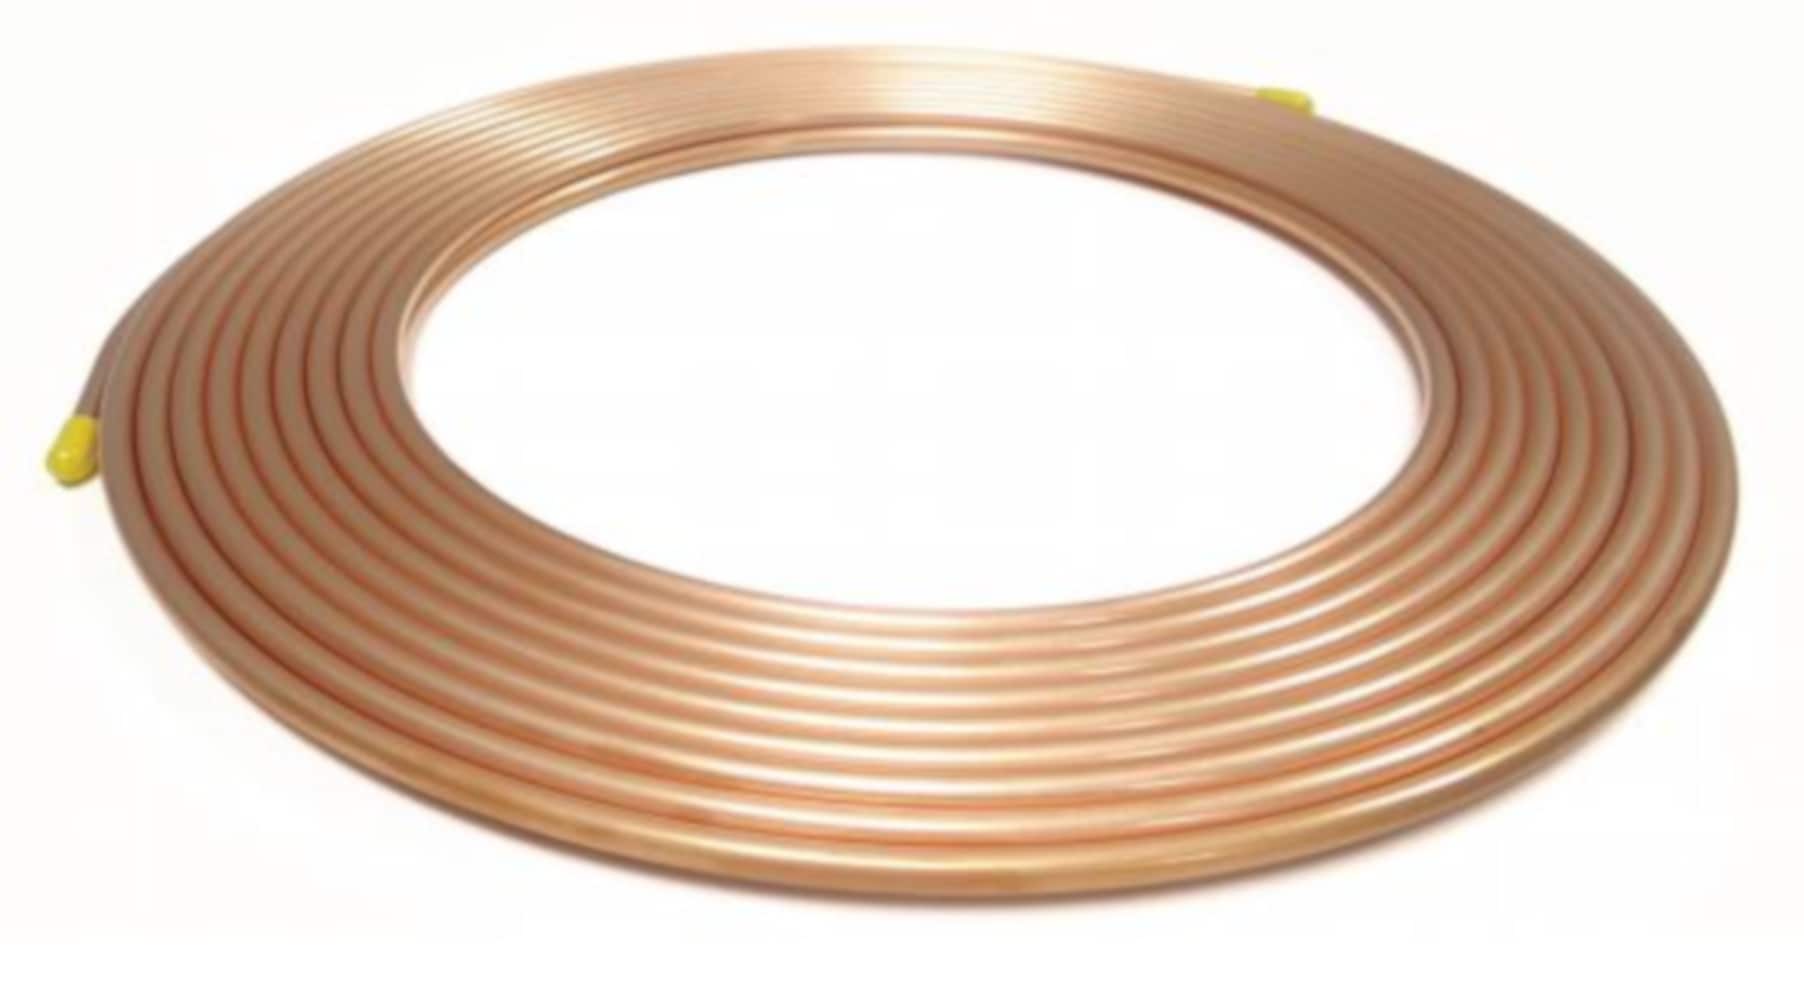 Copper Pipe, Copper Tube, OD 4mm X ID 3mm Copper Pipe Copper For  Refrigeration Plumbing